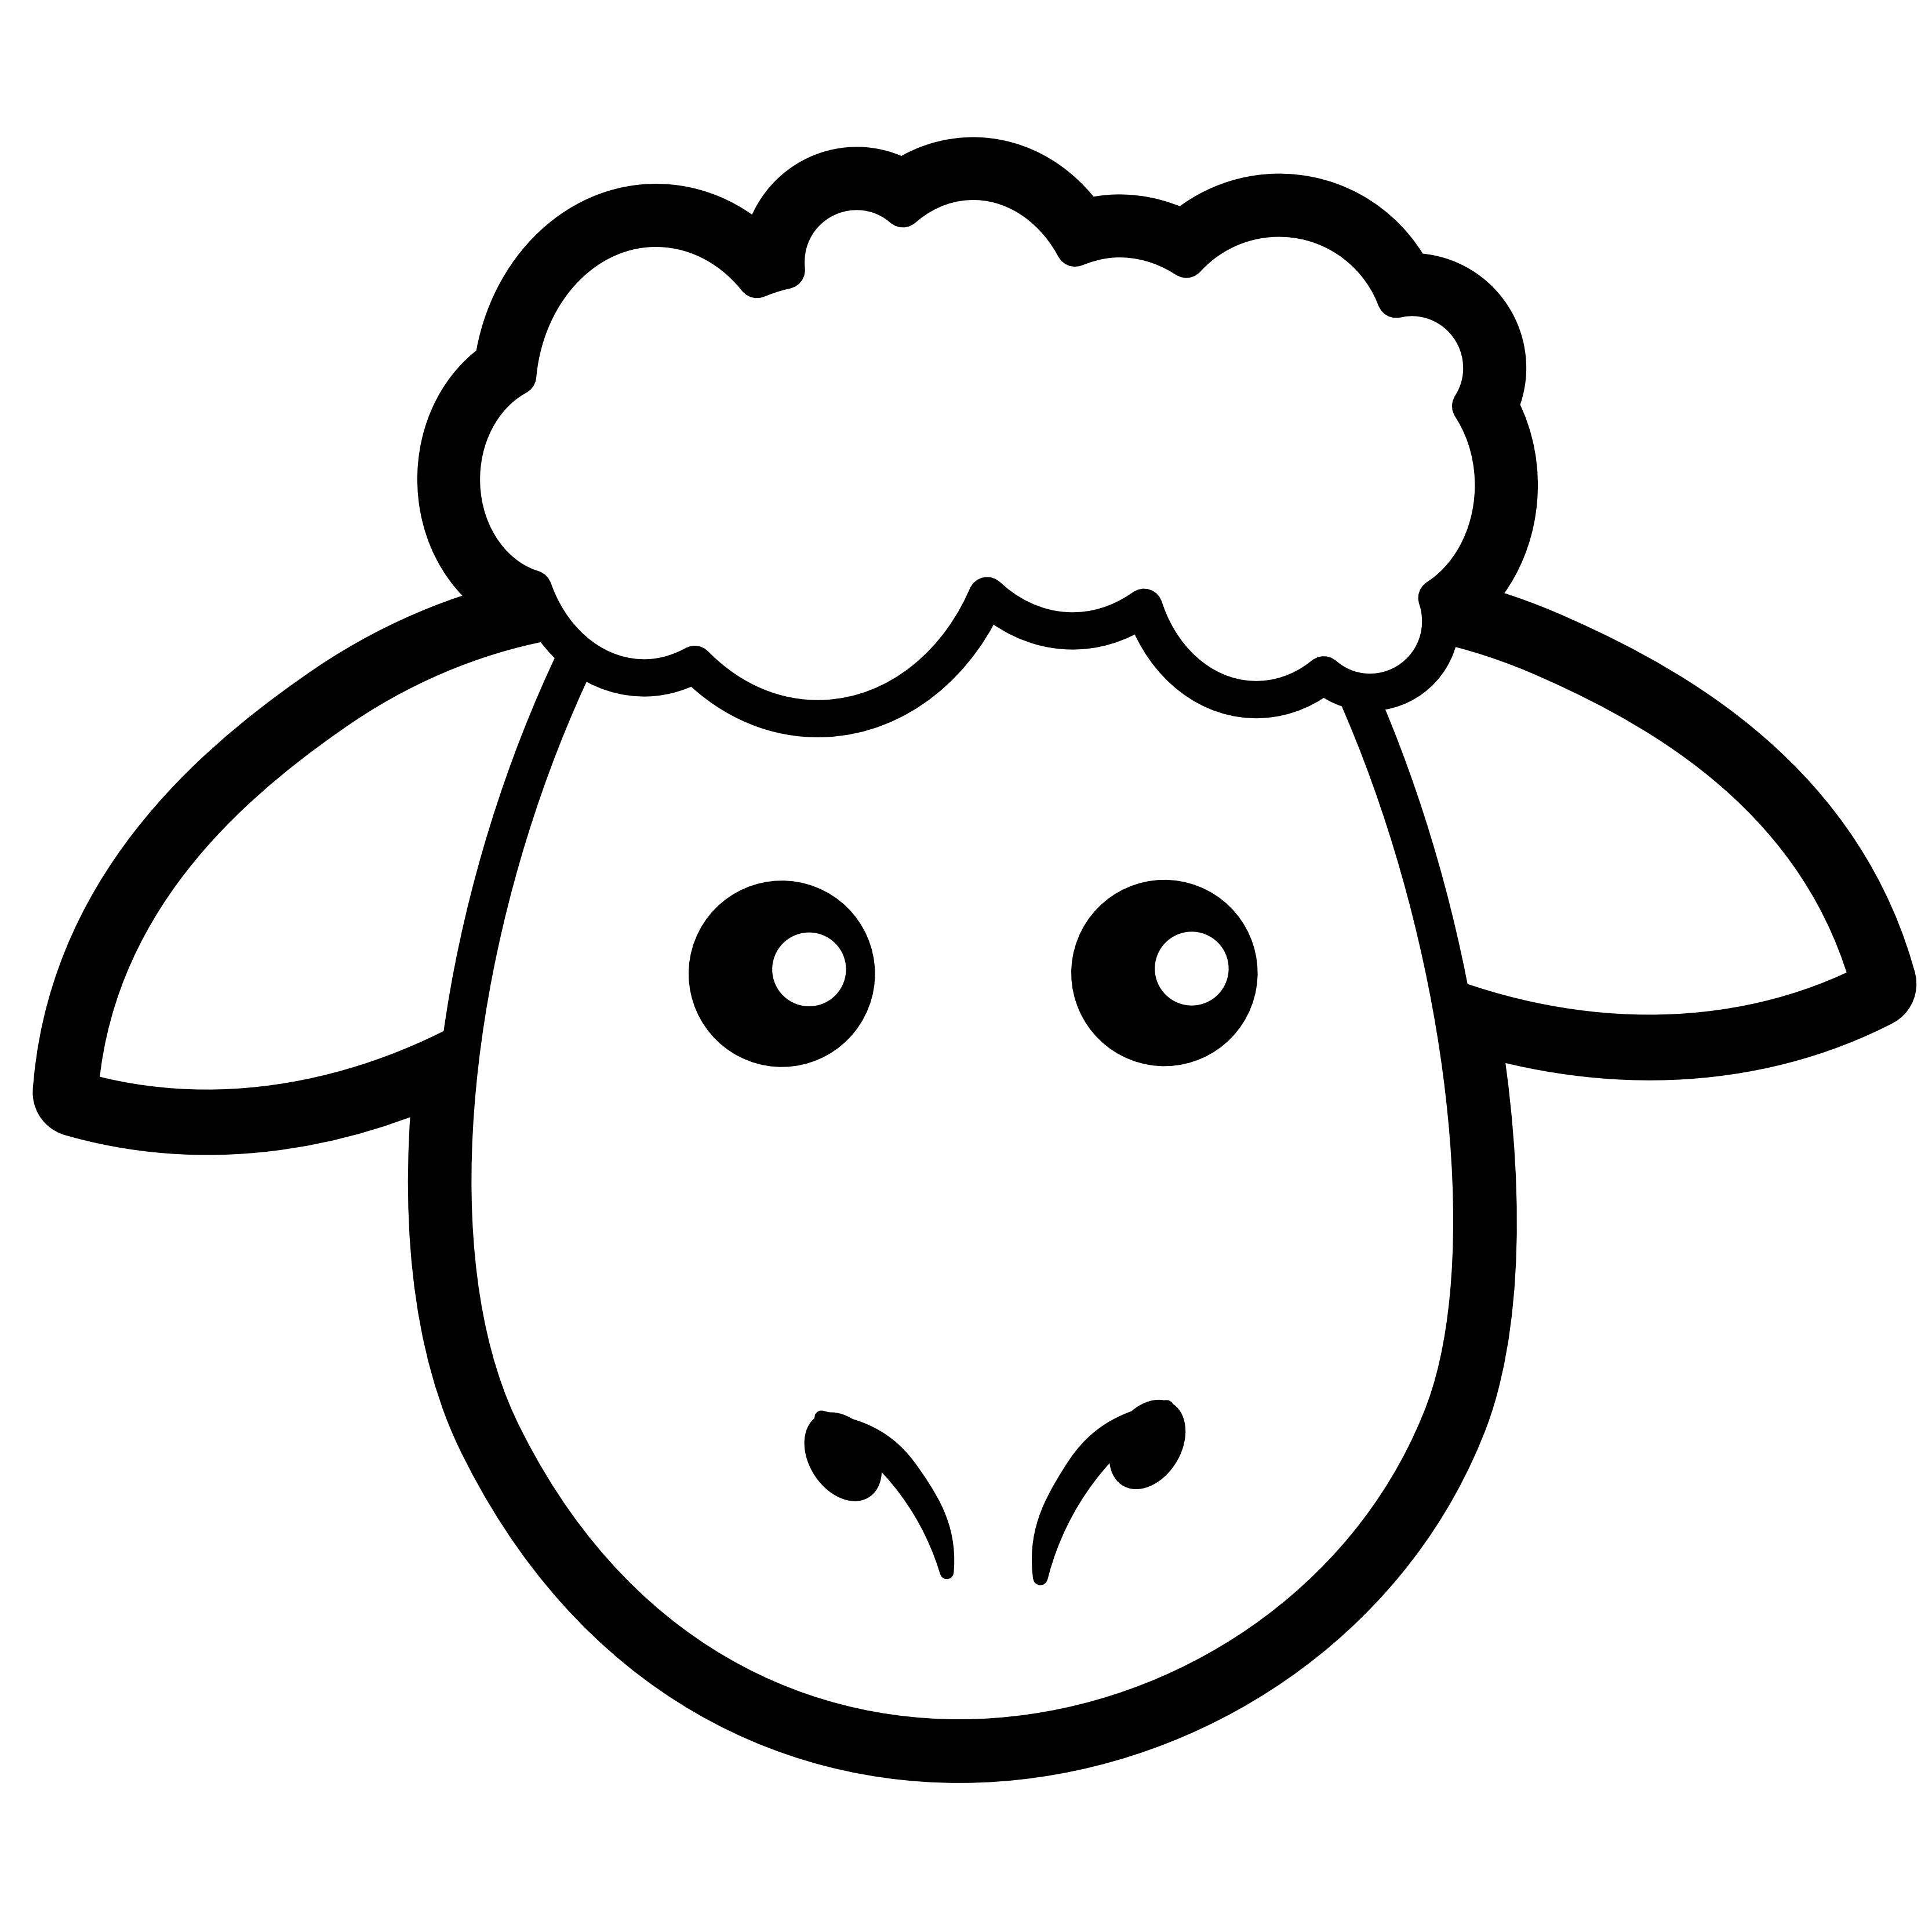 Mad clipart ram. Cow head free download